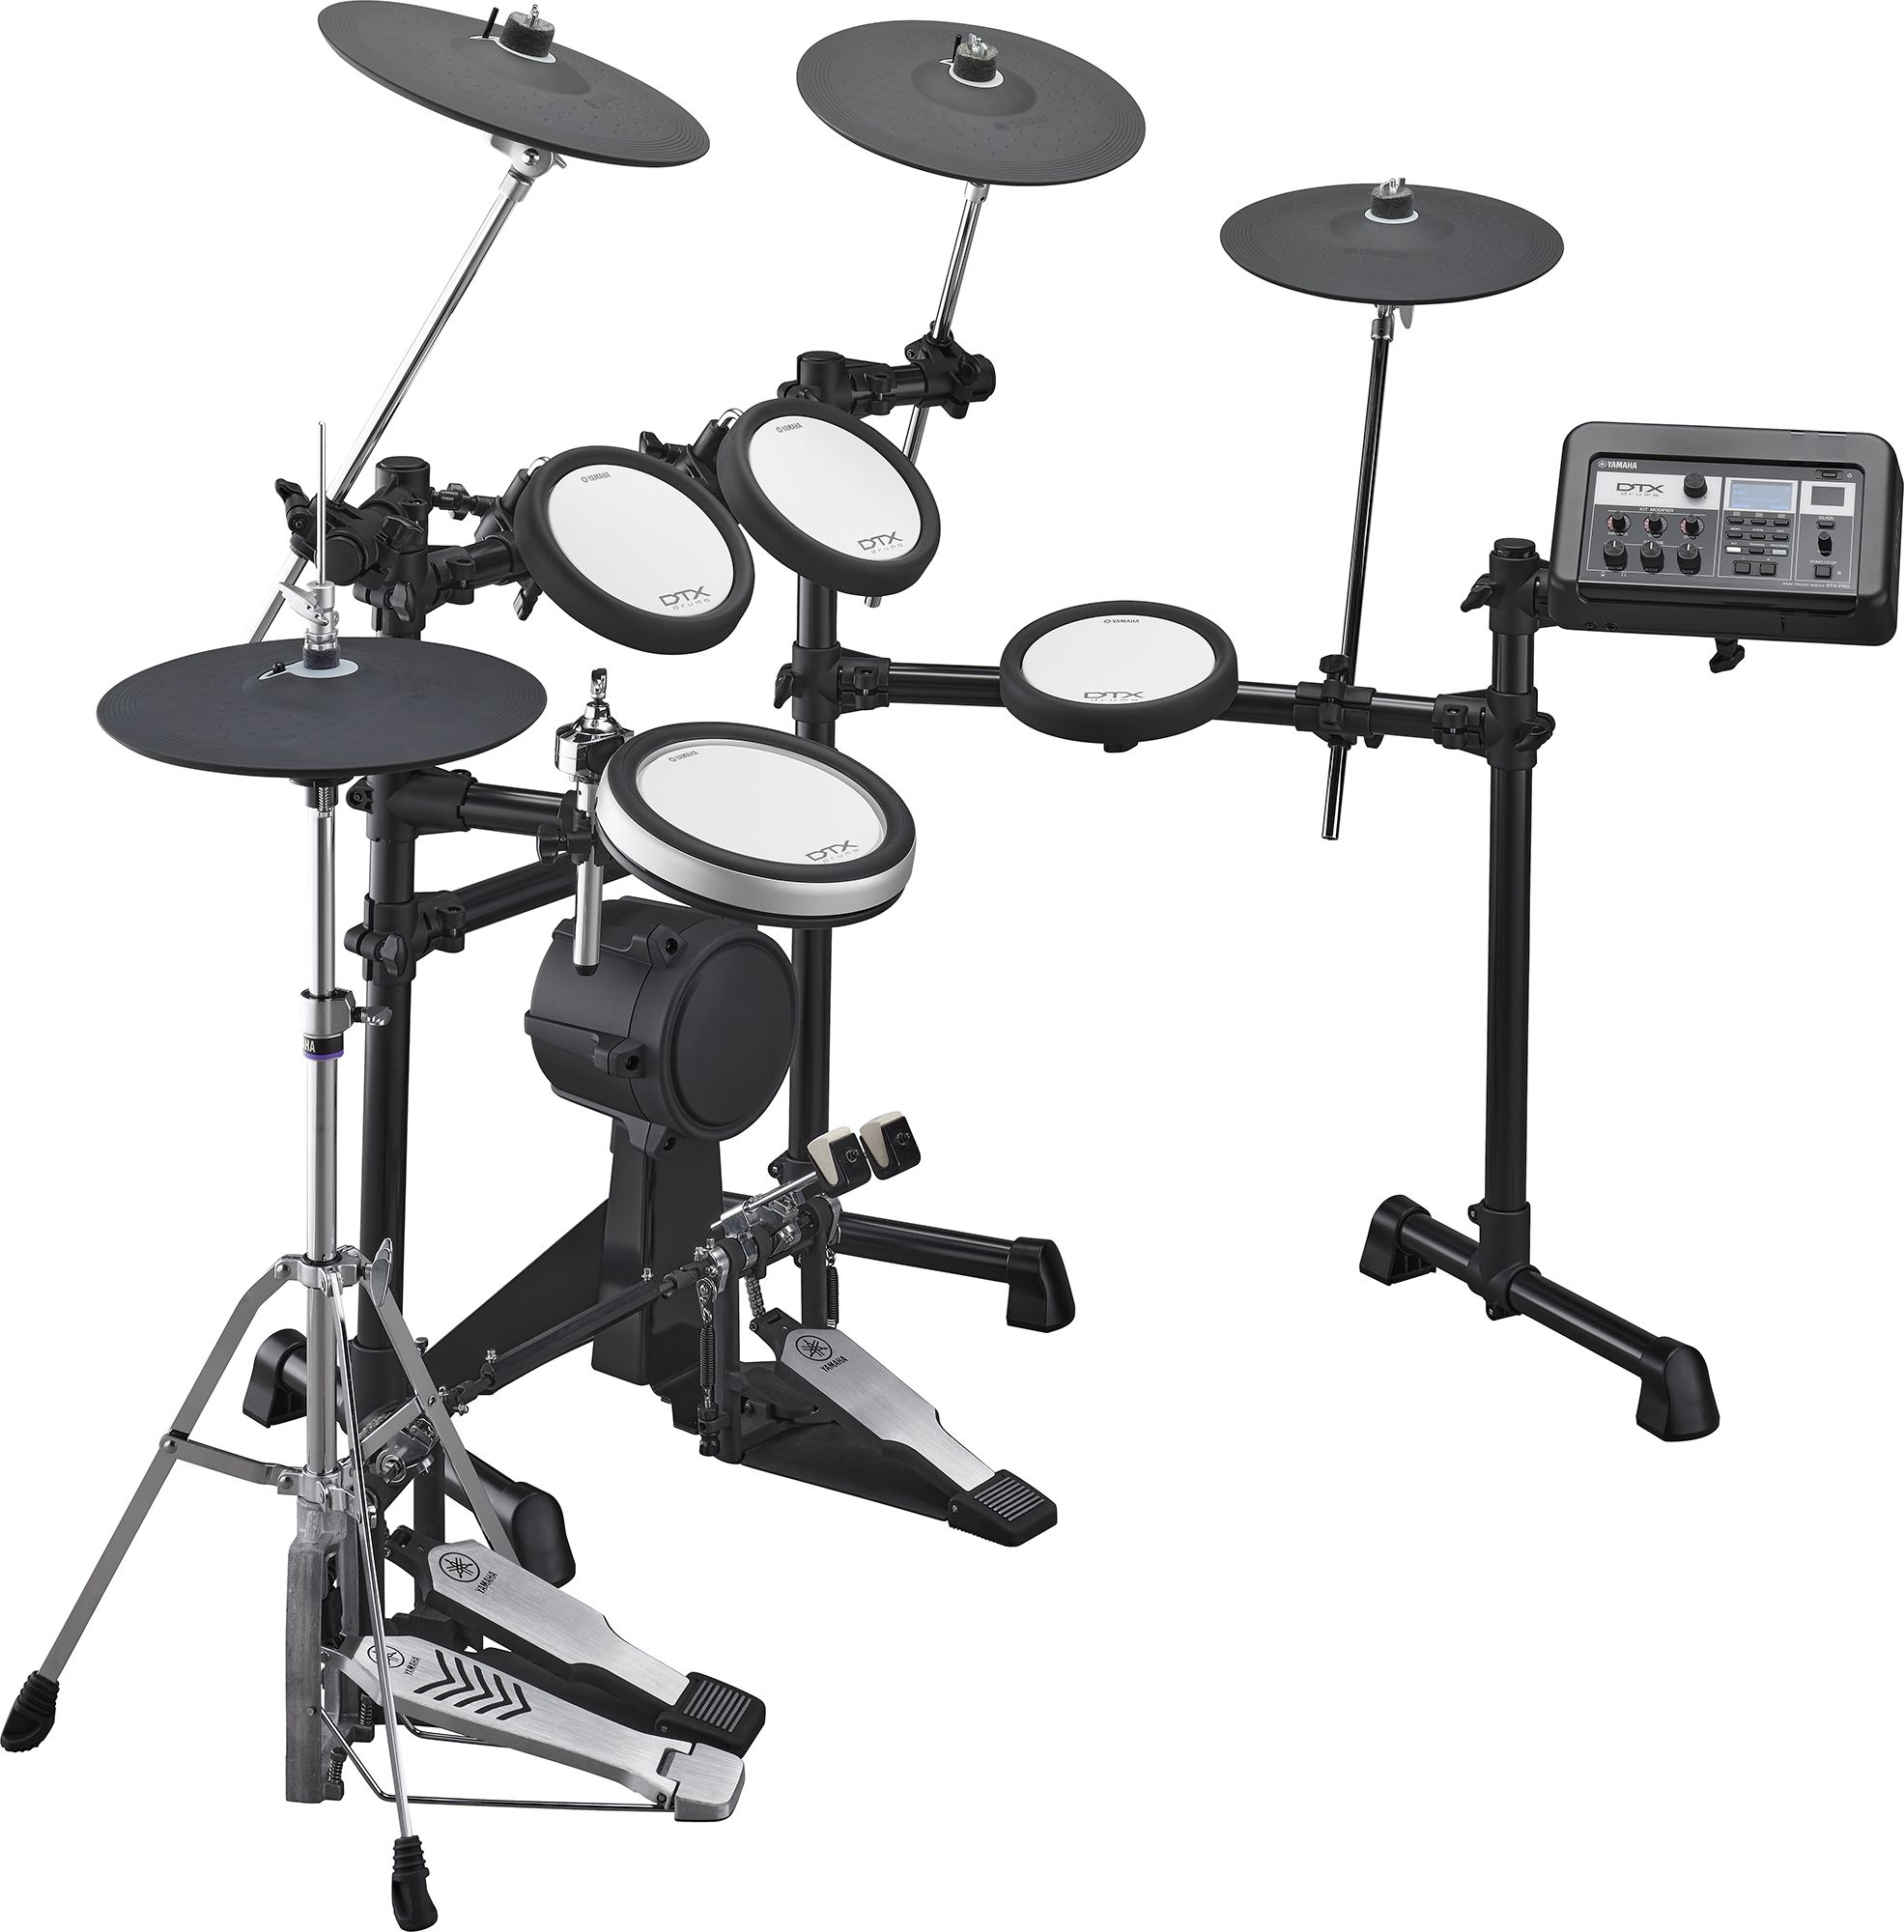 DTX6 Series - Products - Electronic Drum Kits - Electronic Drums - Drums -  Musical Instruments - Products - Yamaha - Africa / Asia / CIS / Latin  America / Middle East / Oceania